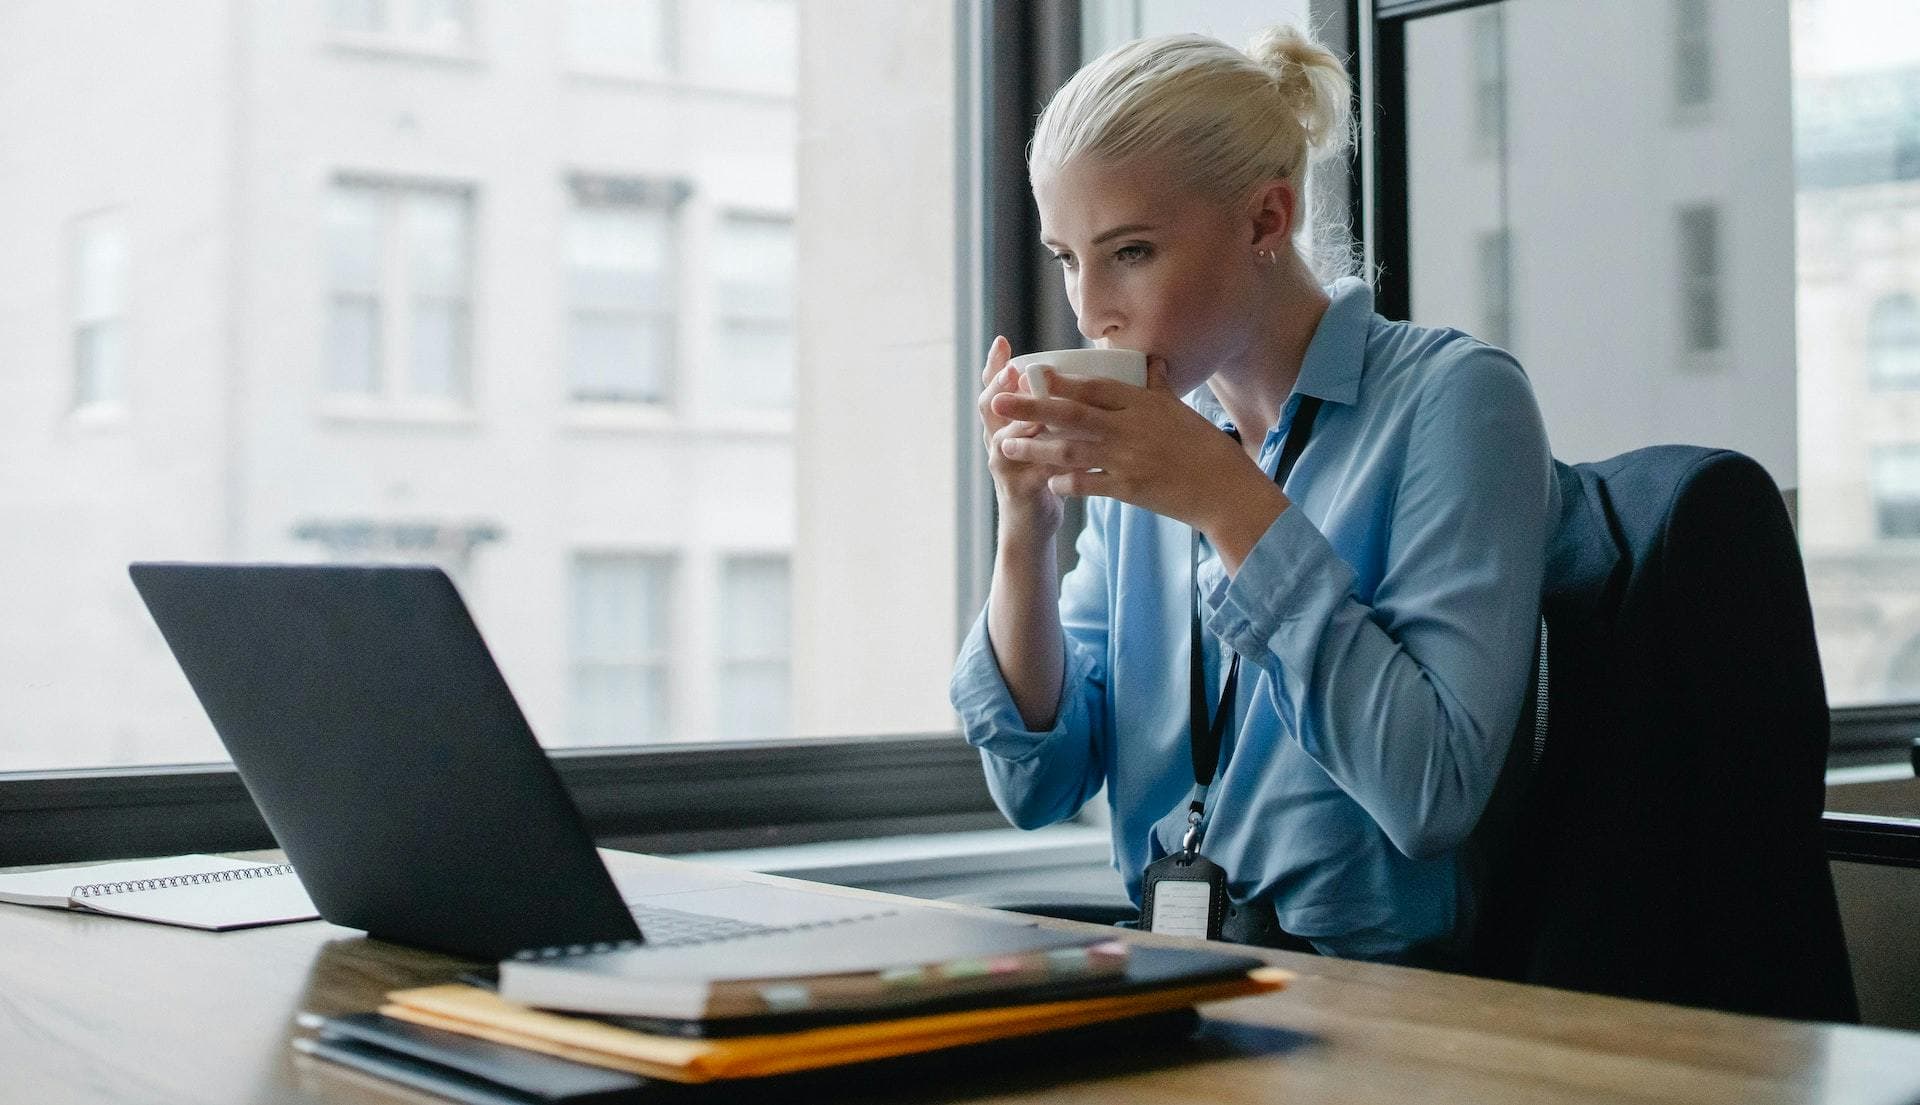 Business woman in a blue shirt drinking coffee at her desk